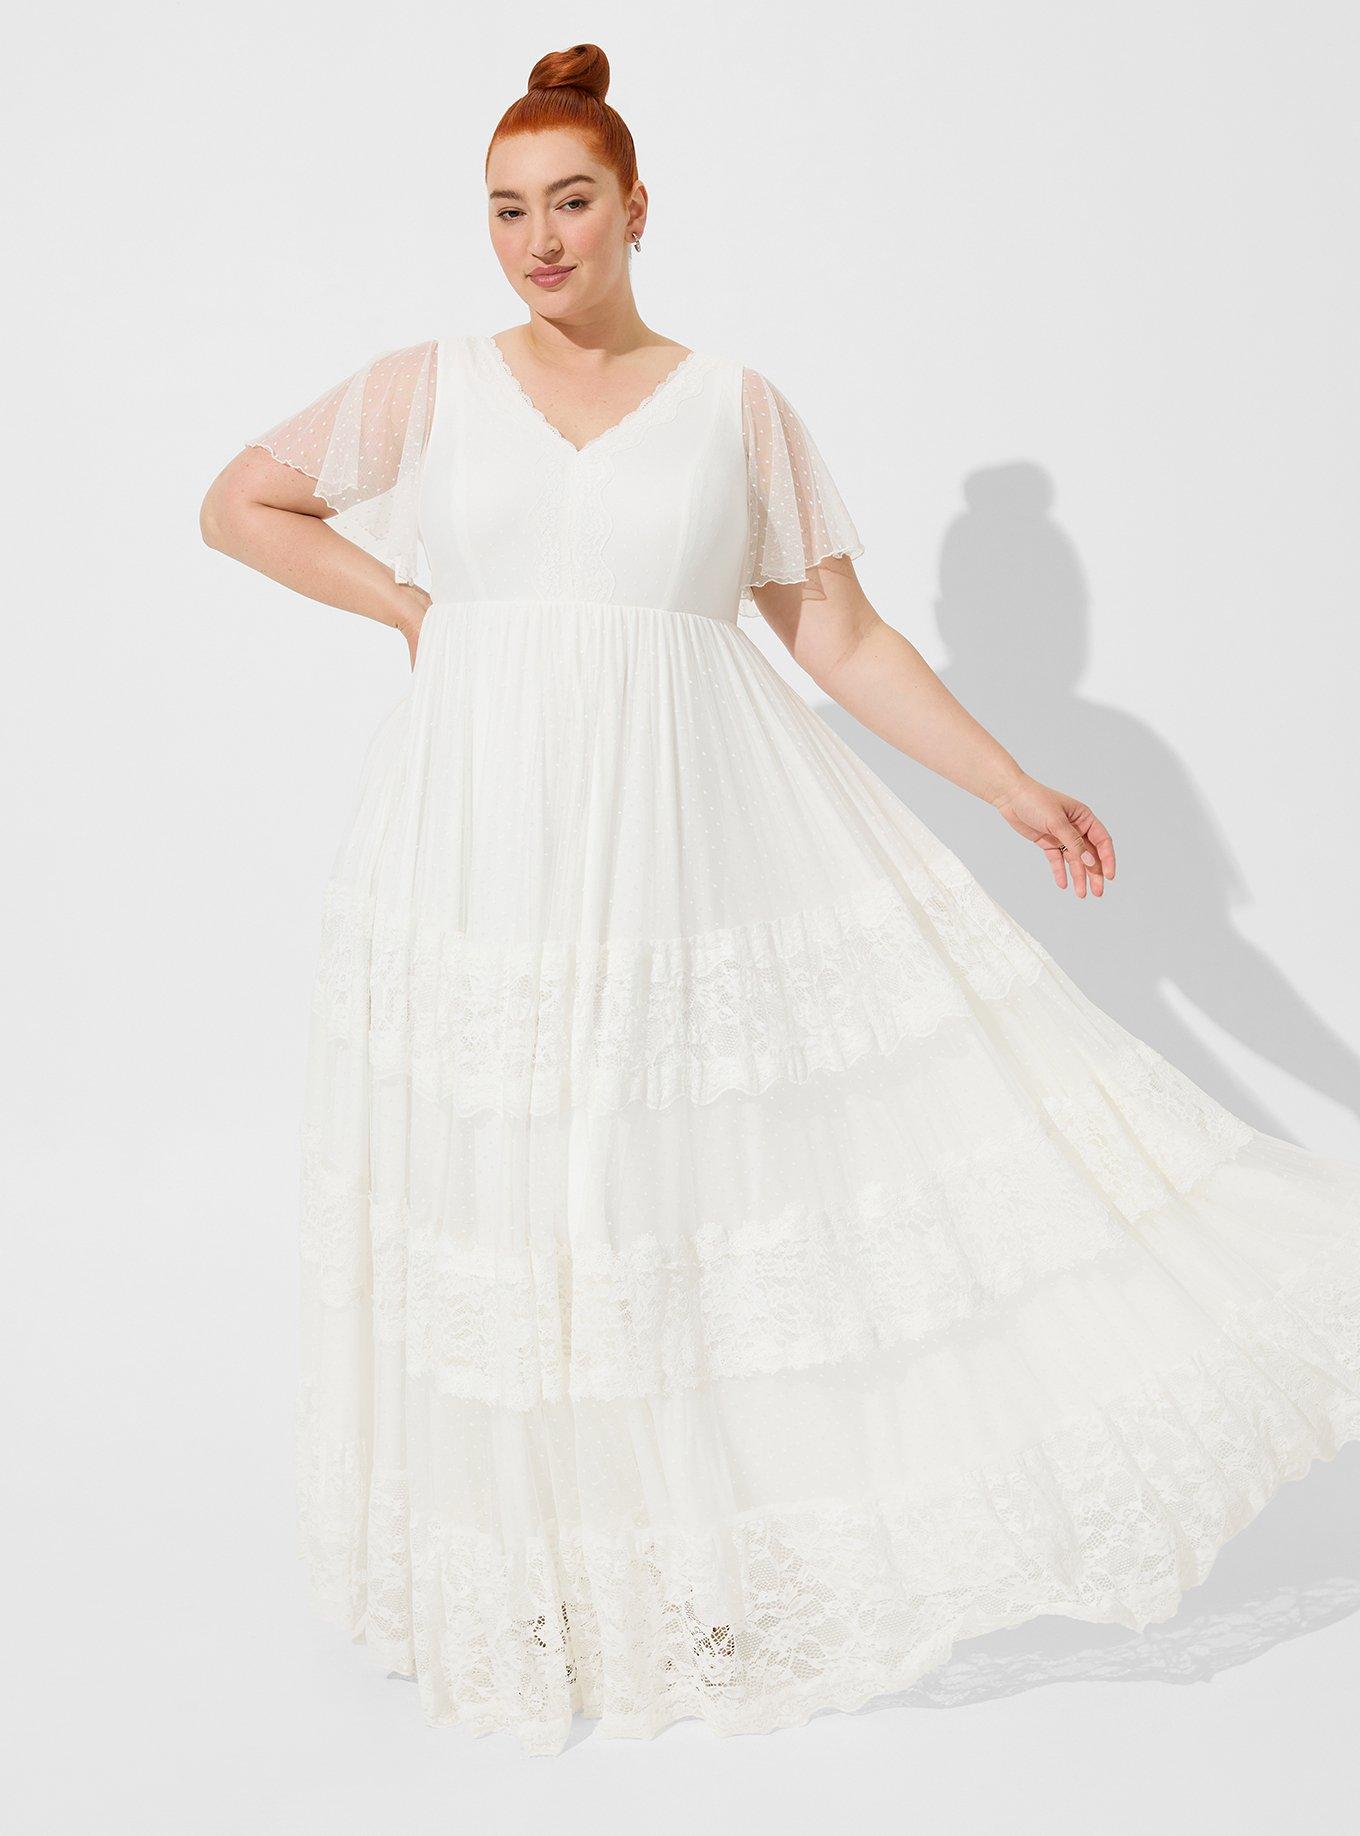 Buy Plus Size Boho Wedding Dress With Long Wide Sleeves, V Neckline, Tulle  Skirt, ALL SIZES, Curvy Bride Boho Wedding Dress, a Line Bridal Dress  Online in India 